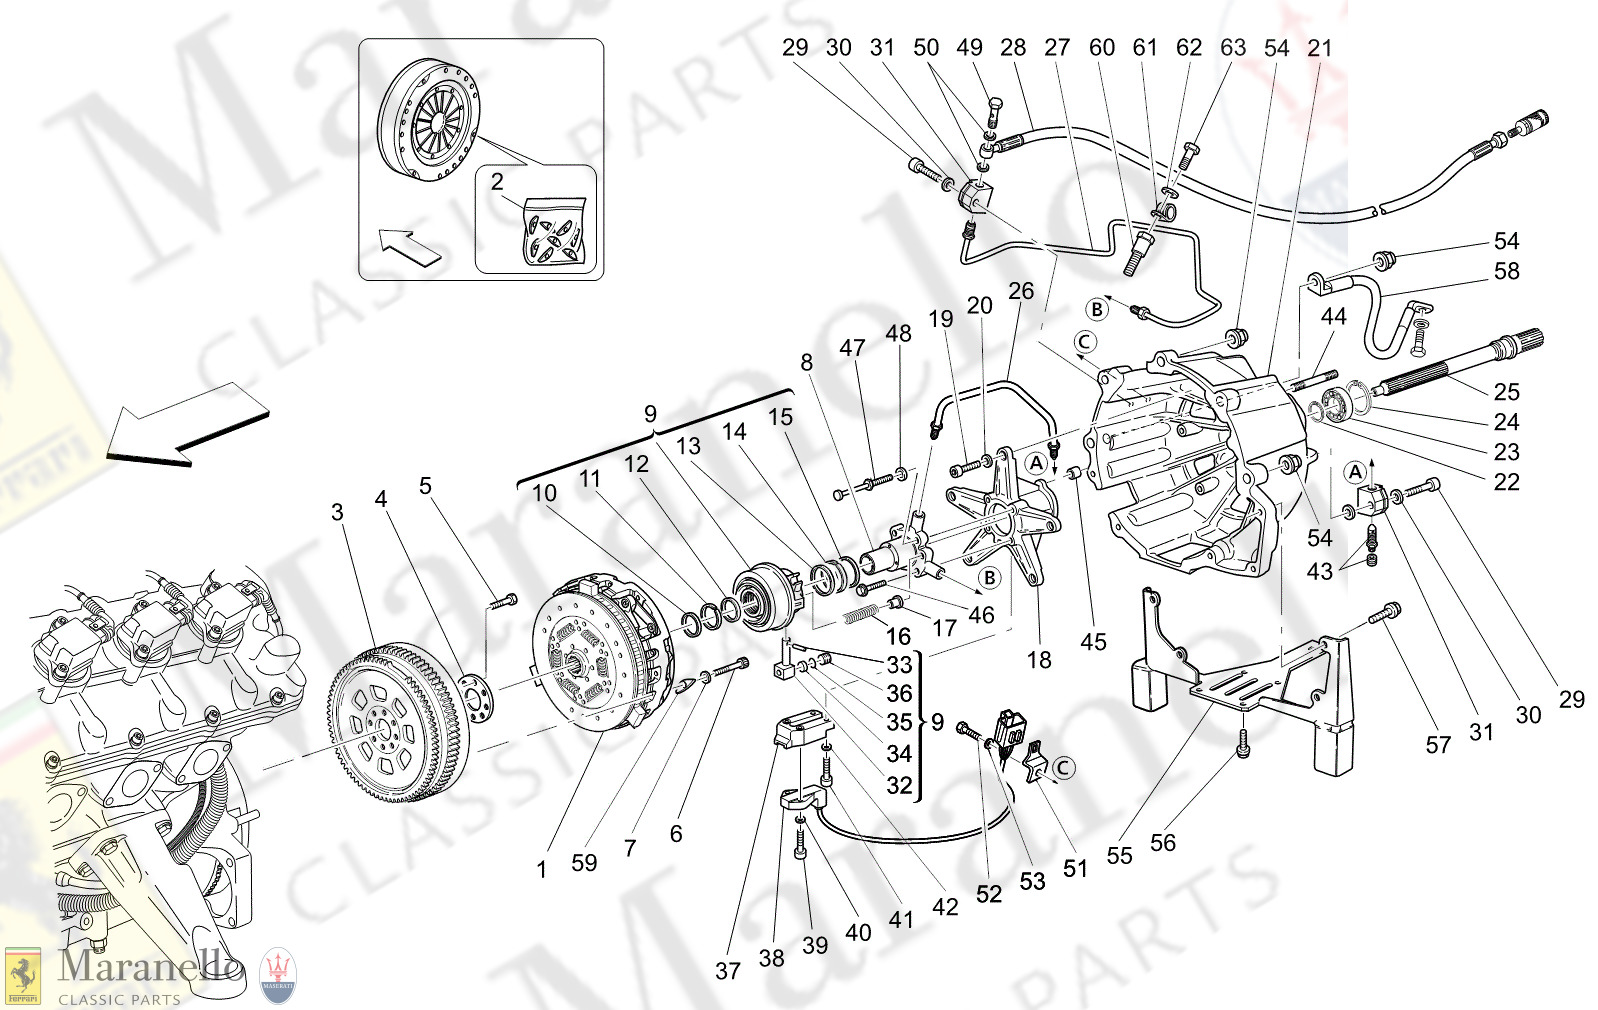 M2.11 - 13 - M211 - 13 Friction Discs And Housing For F1 Gearbox